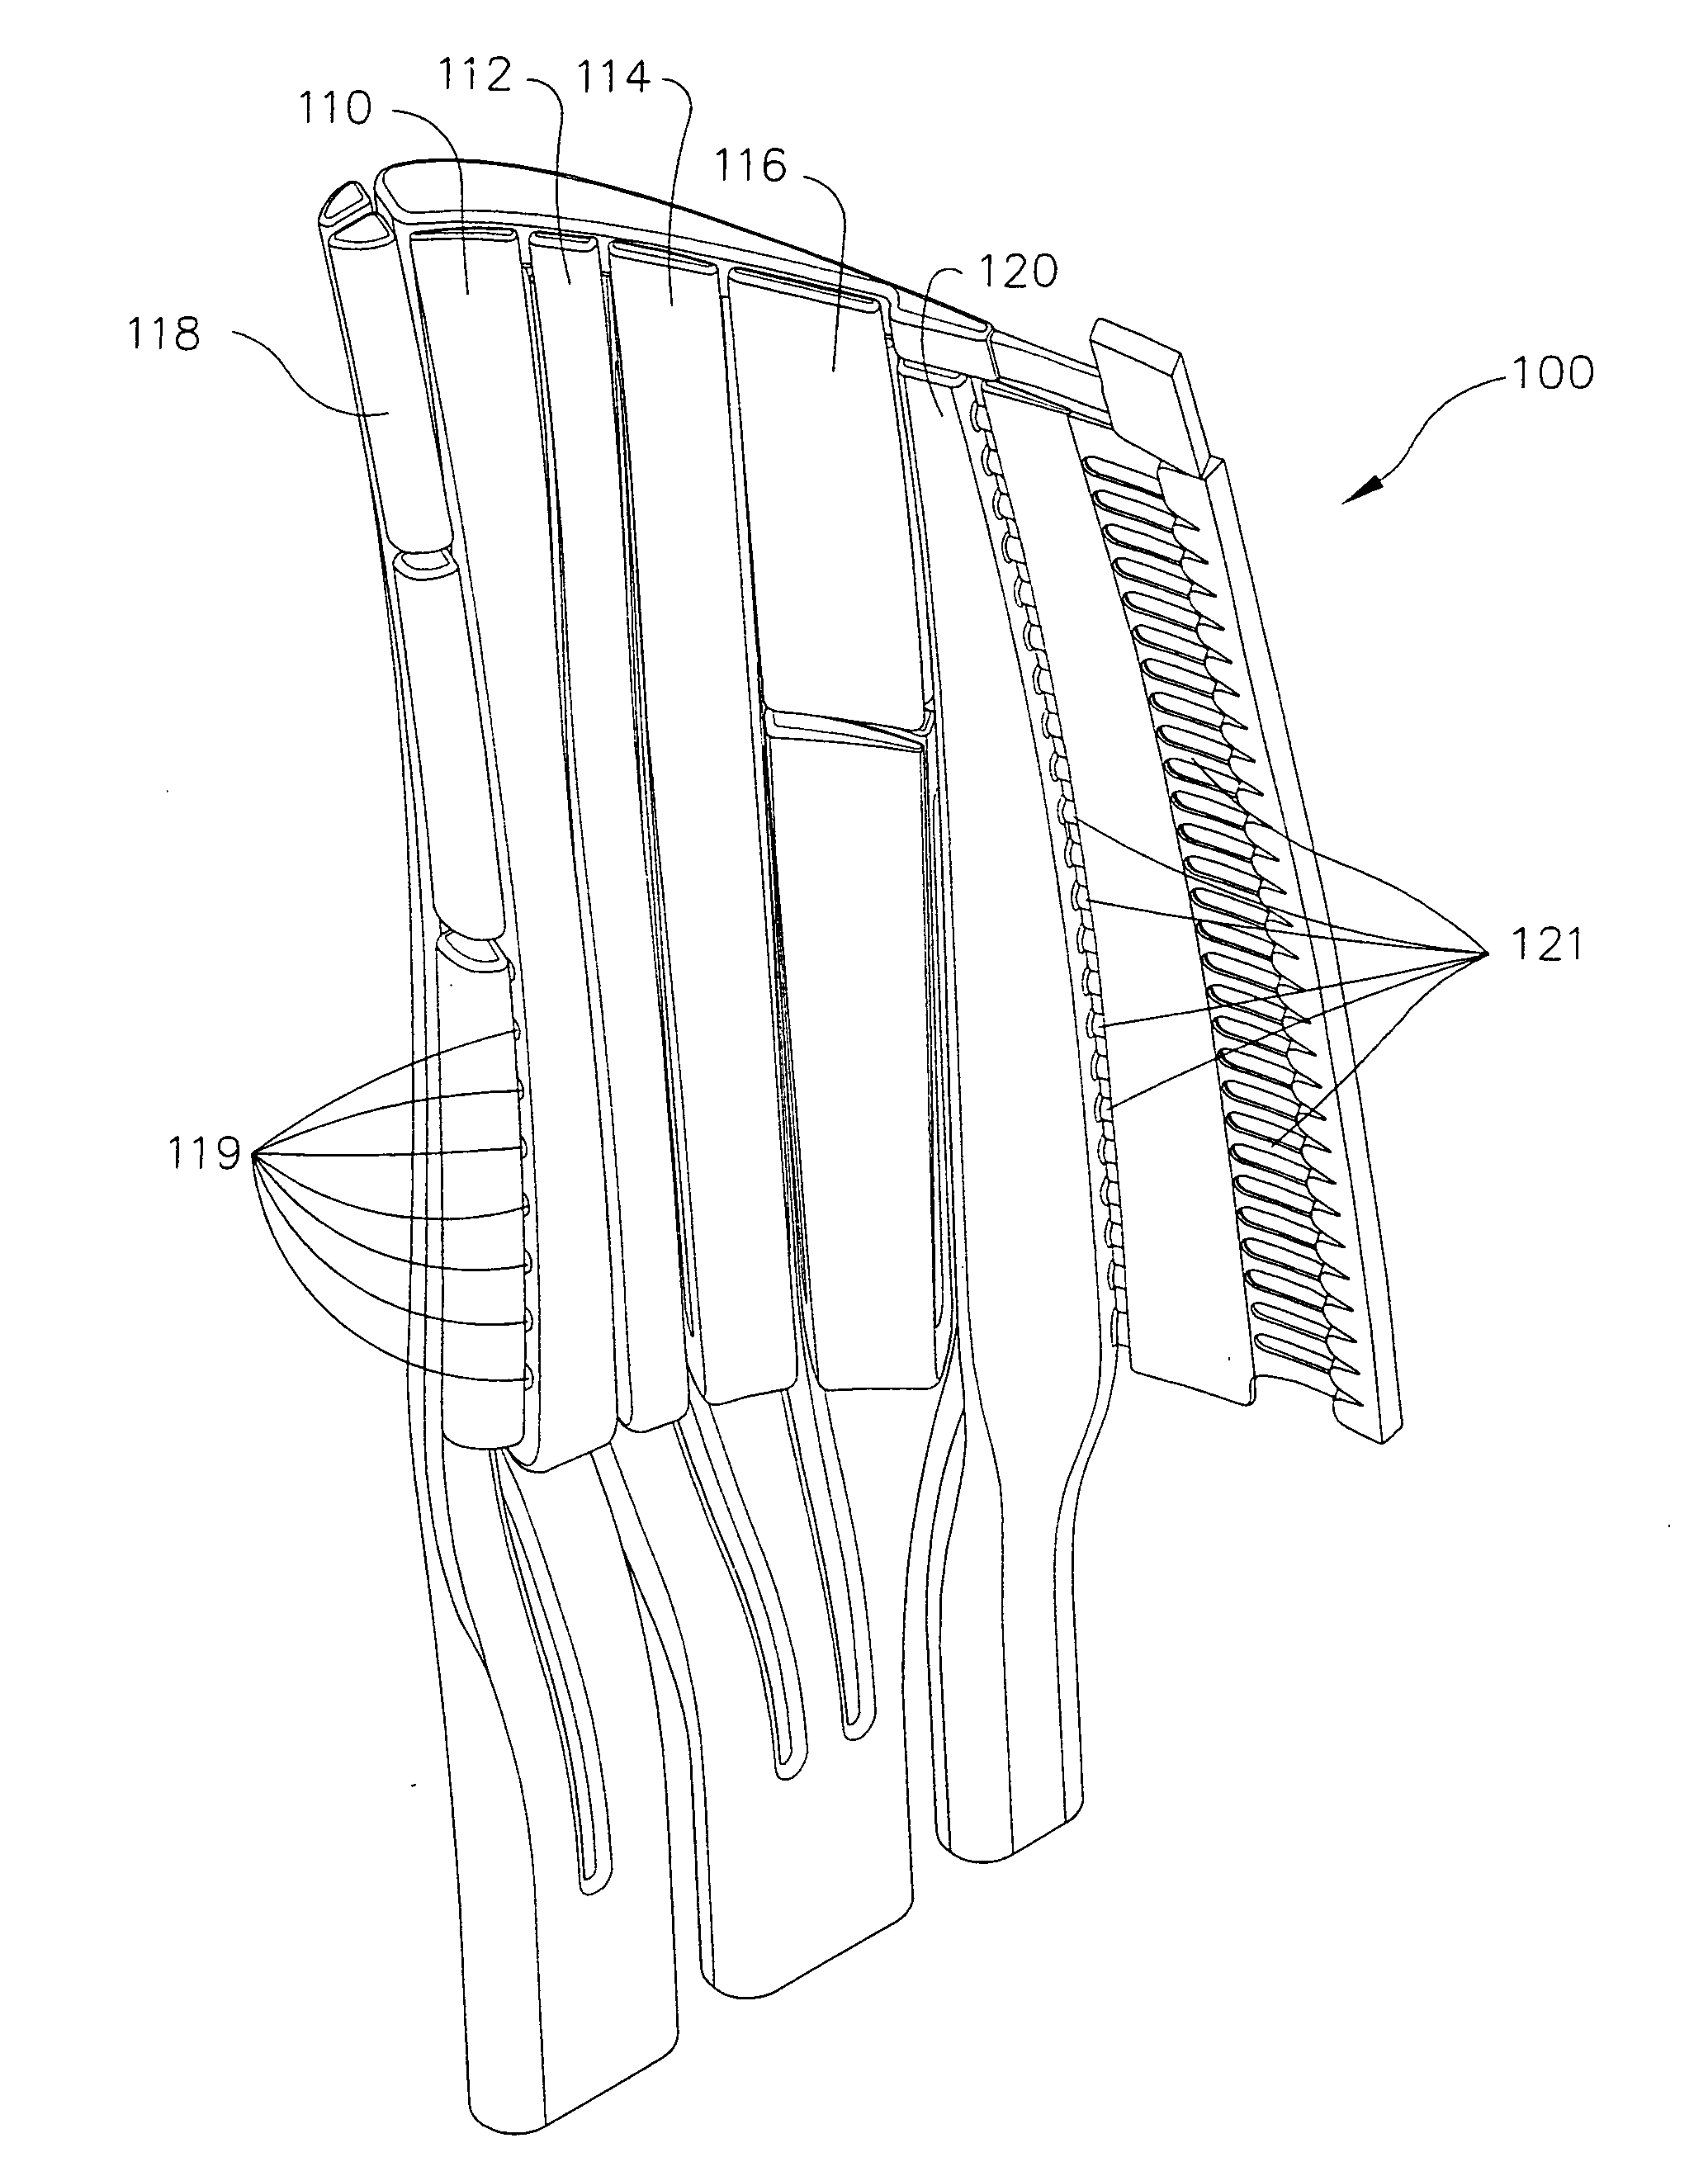 Airfoil cooling circuits and method